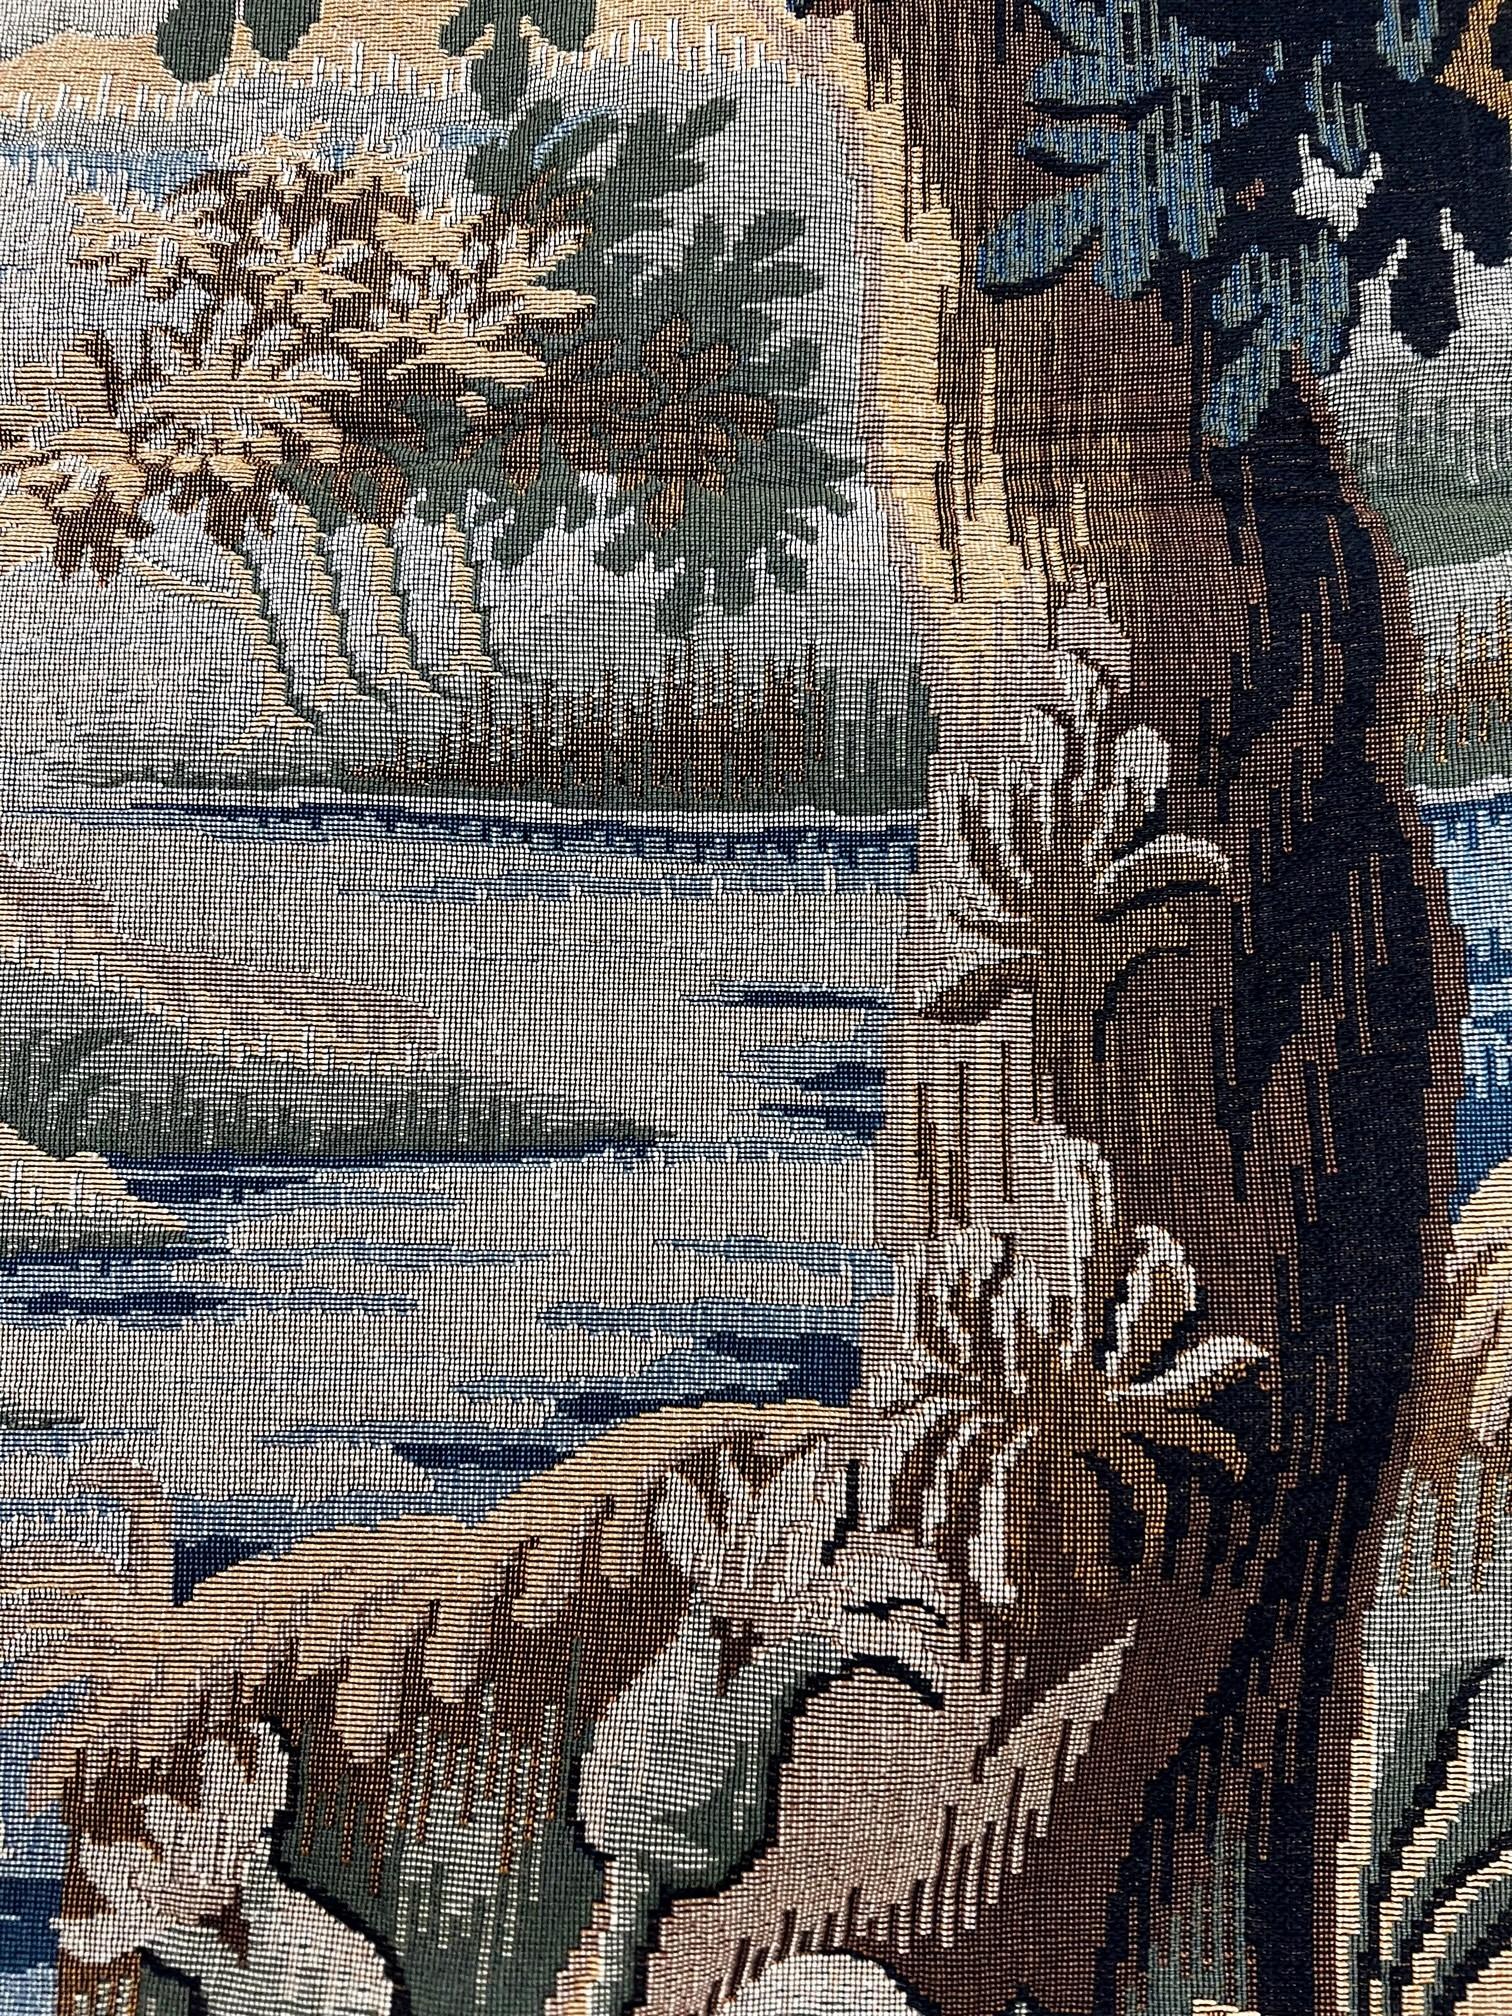 Inspired by the Flanders verdure from the early 17th century. The rapid development of new sciences such as botany inspired weavers to produce tapestries known as 